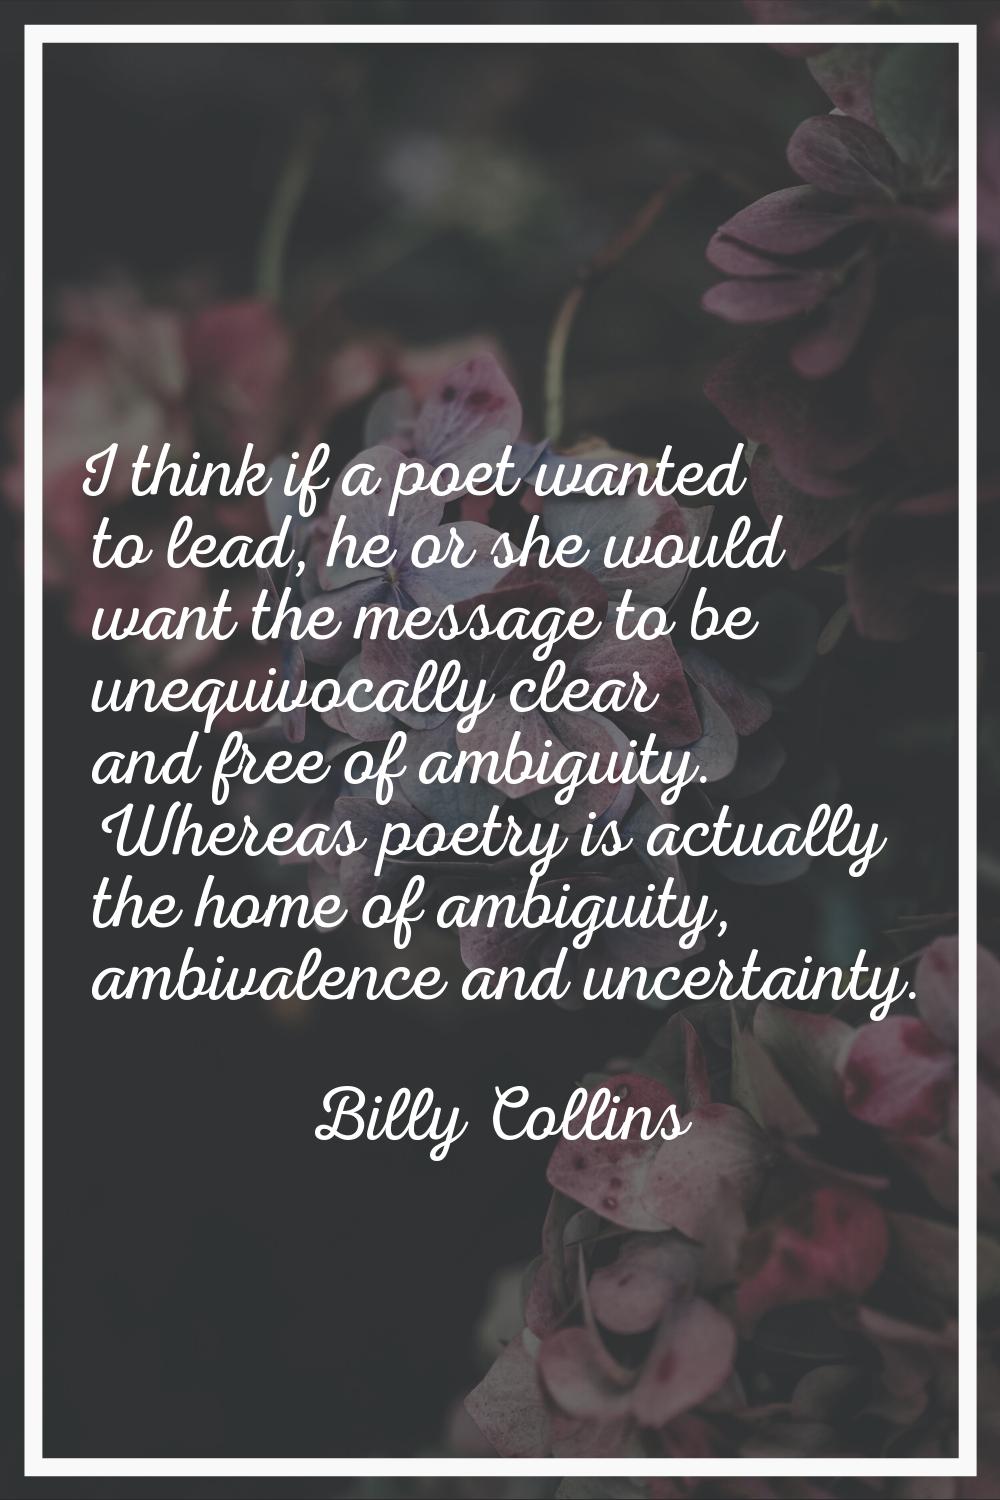 I think if a poet wanted to lead, he or she would want the message to be unequivocally clear and fr